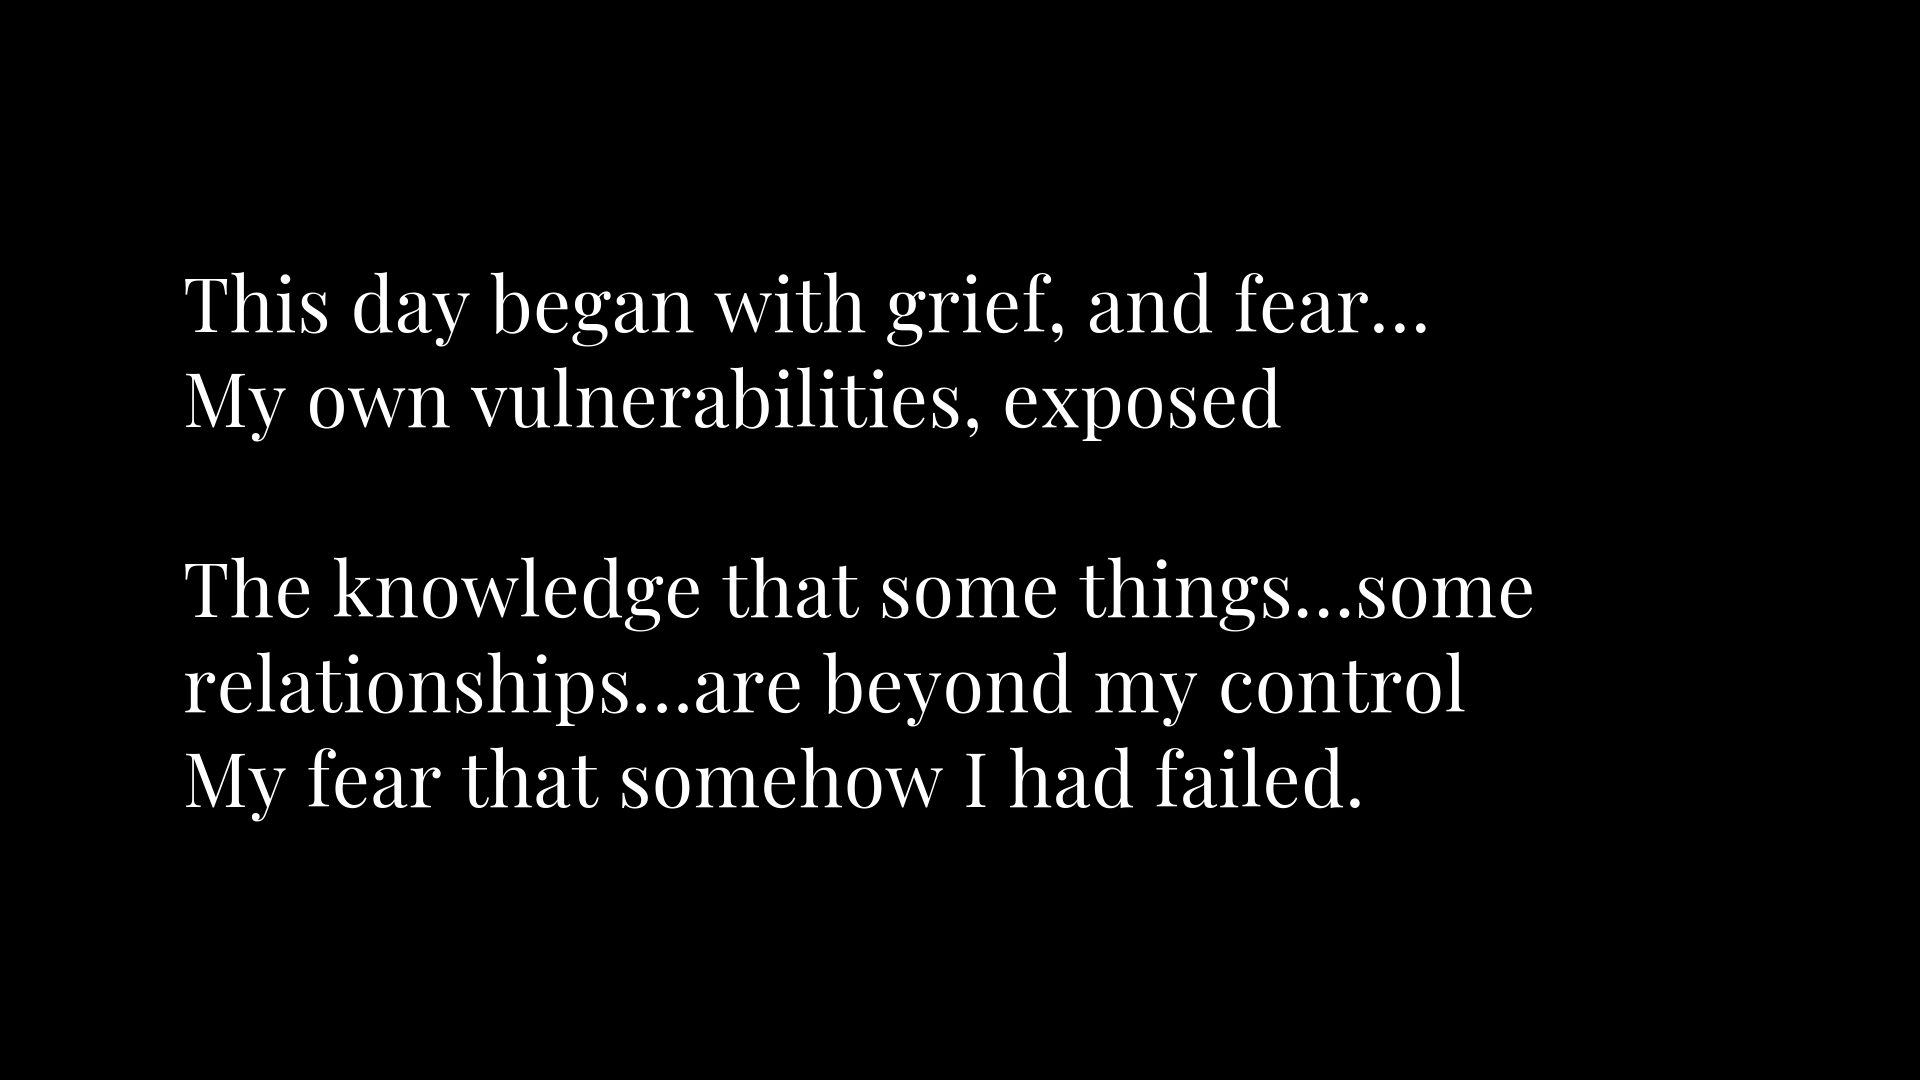 A quote about grief and vulnerability.